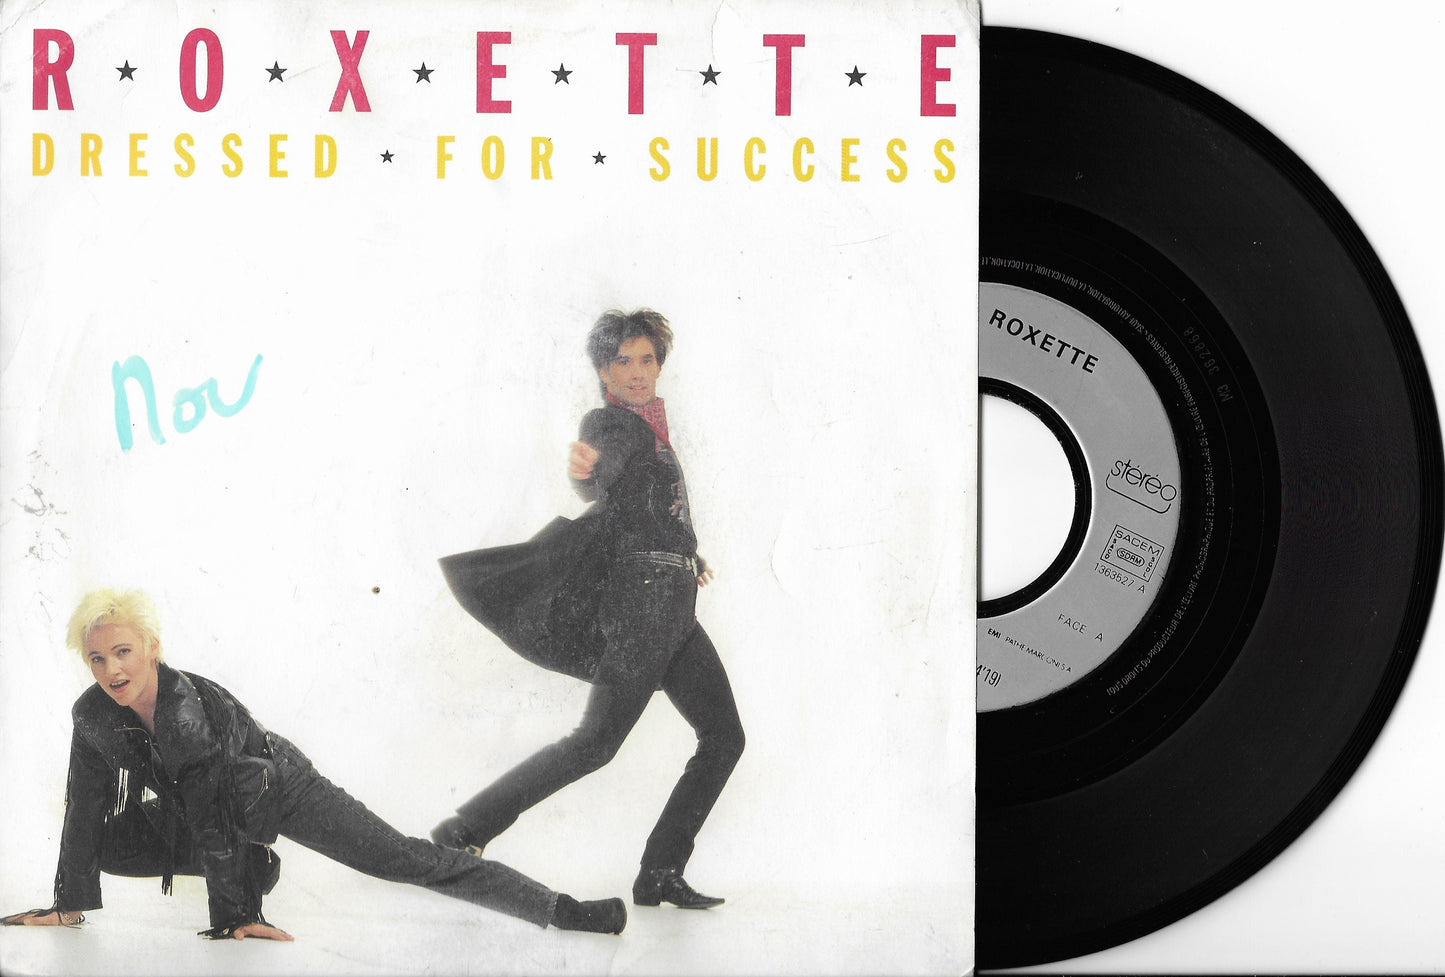 ROXETTE - Dressed For Success